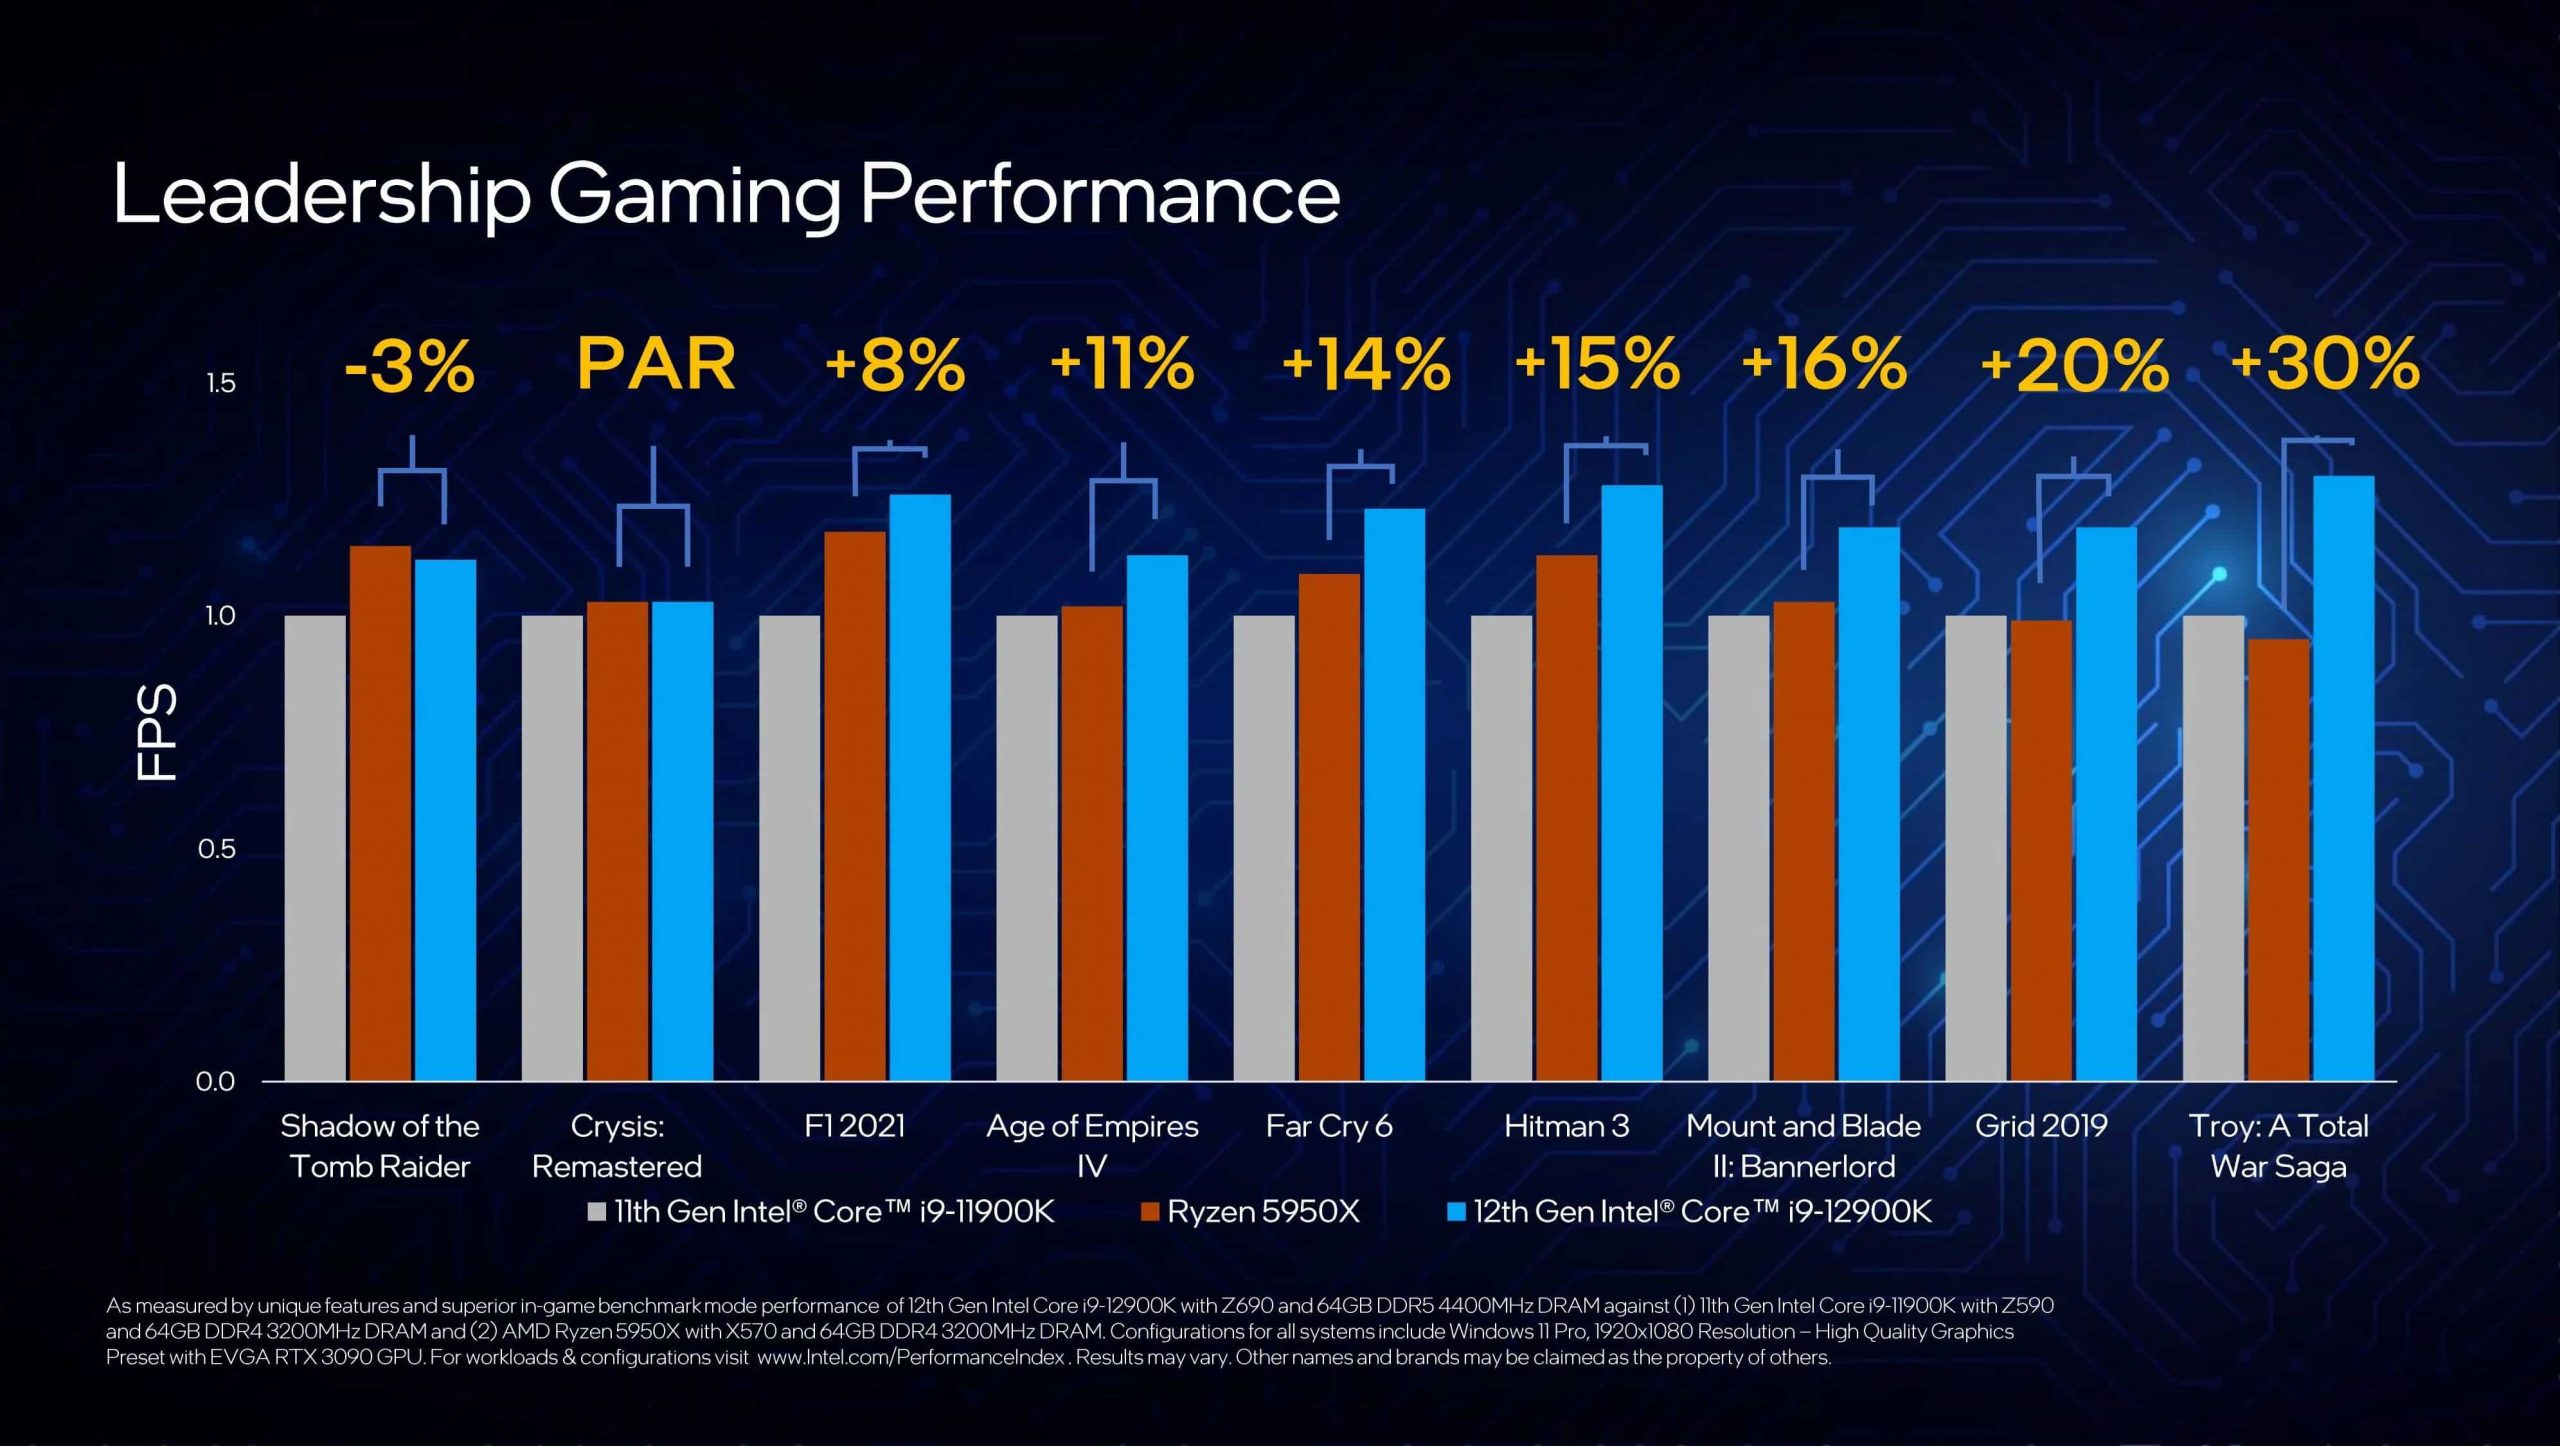 Intel's advertised gaming performance for i9-12900K compared to i9-11900K and Ryzen 9 5950X